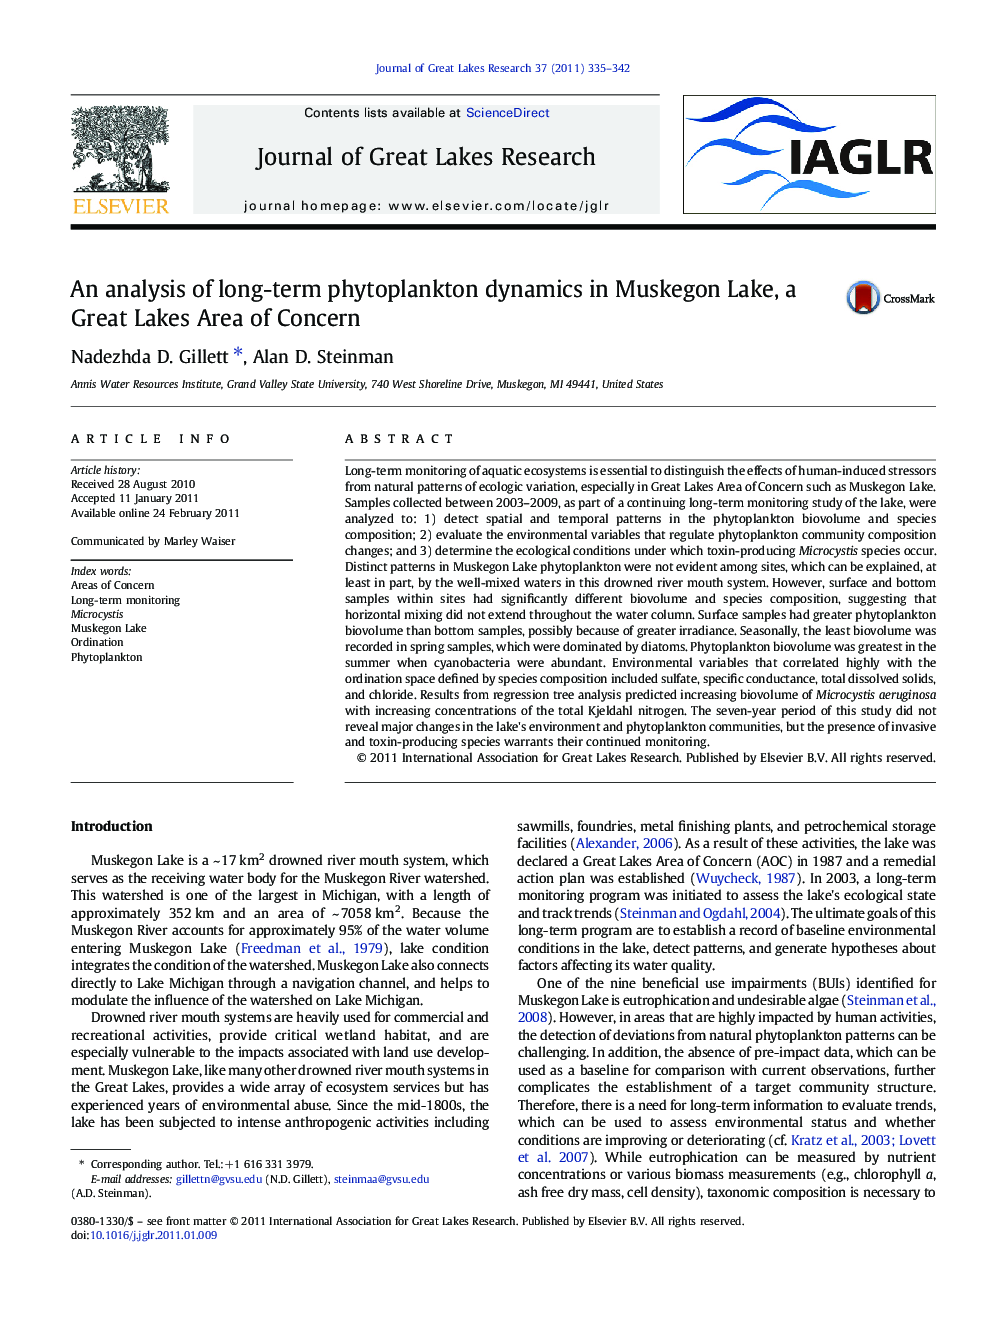 An analysis of long-term phytoplankton dynamics in Muskegon Lake, a Great Lakes Area of Concern